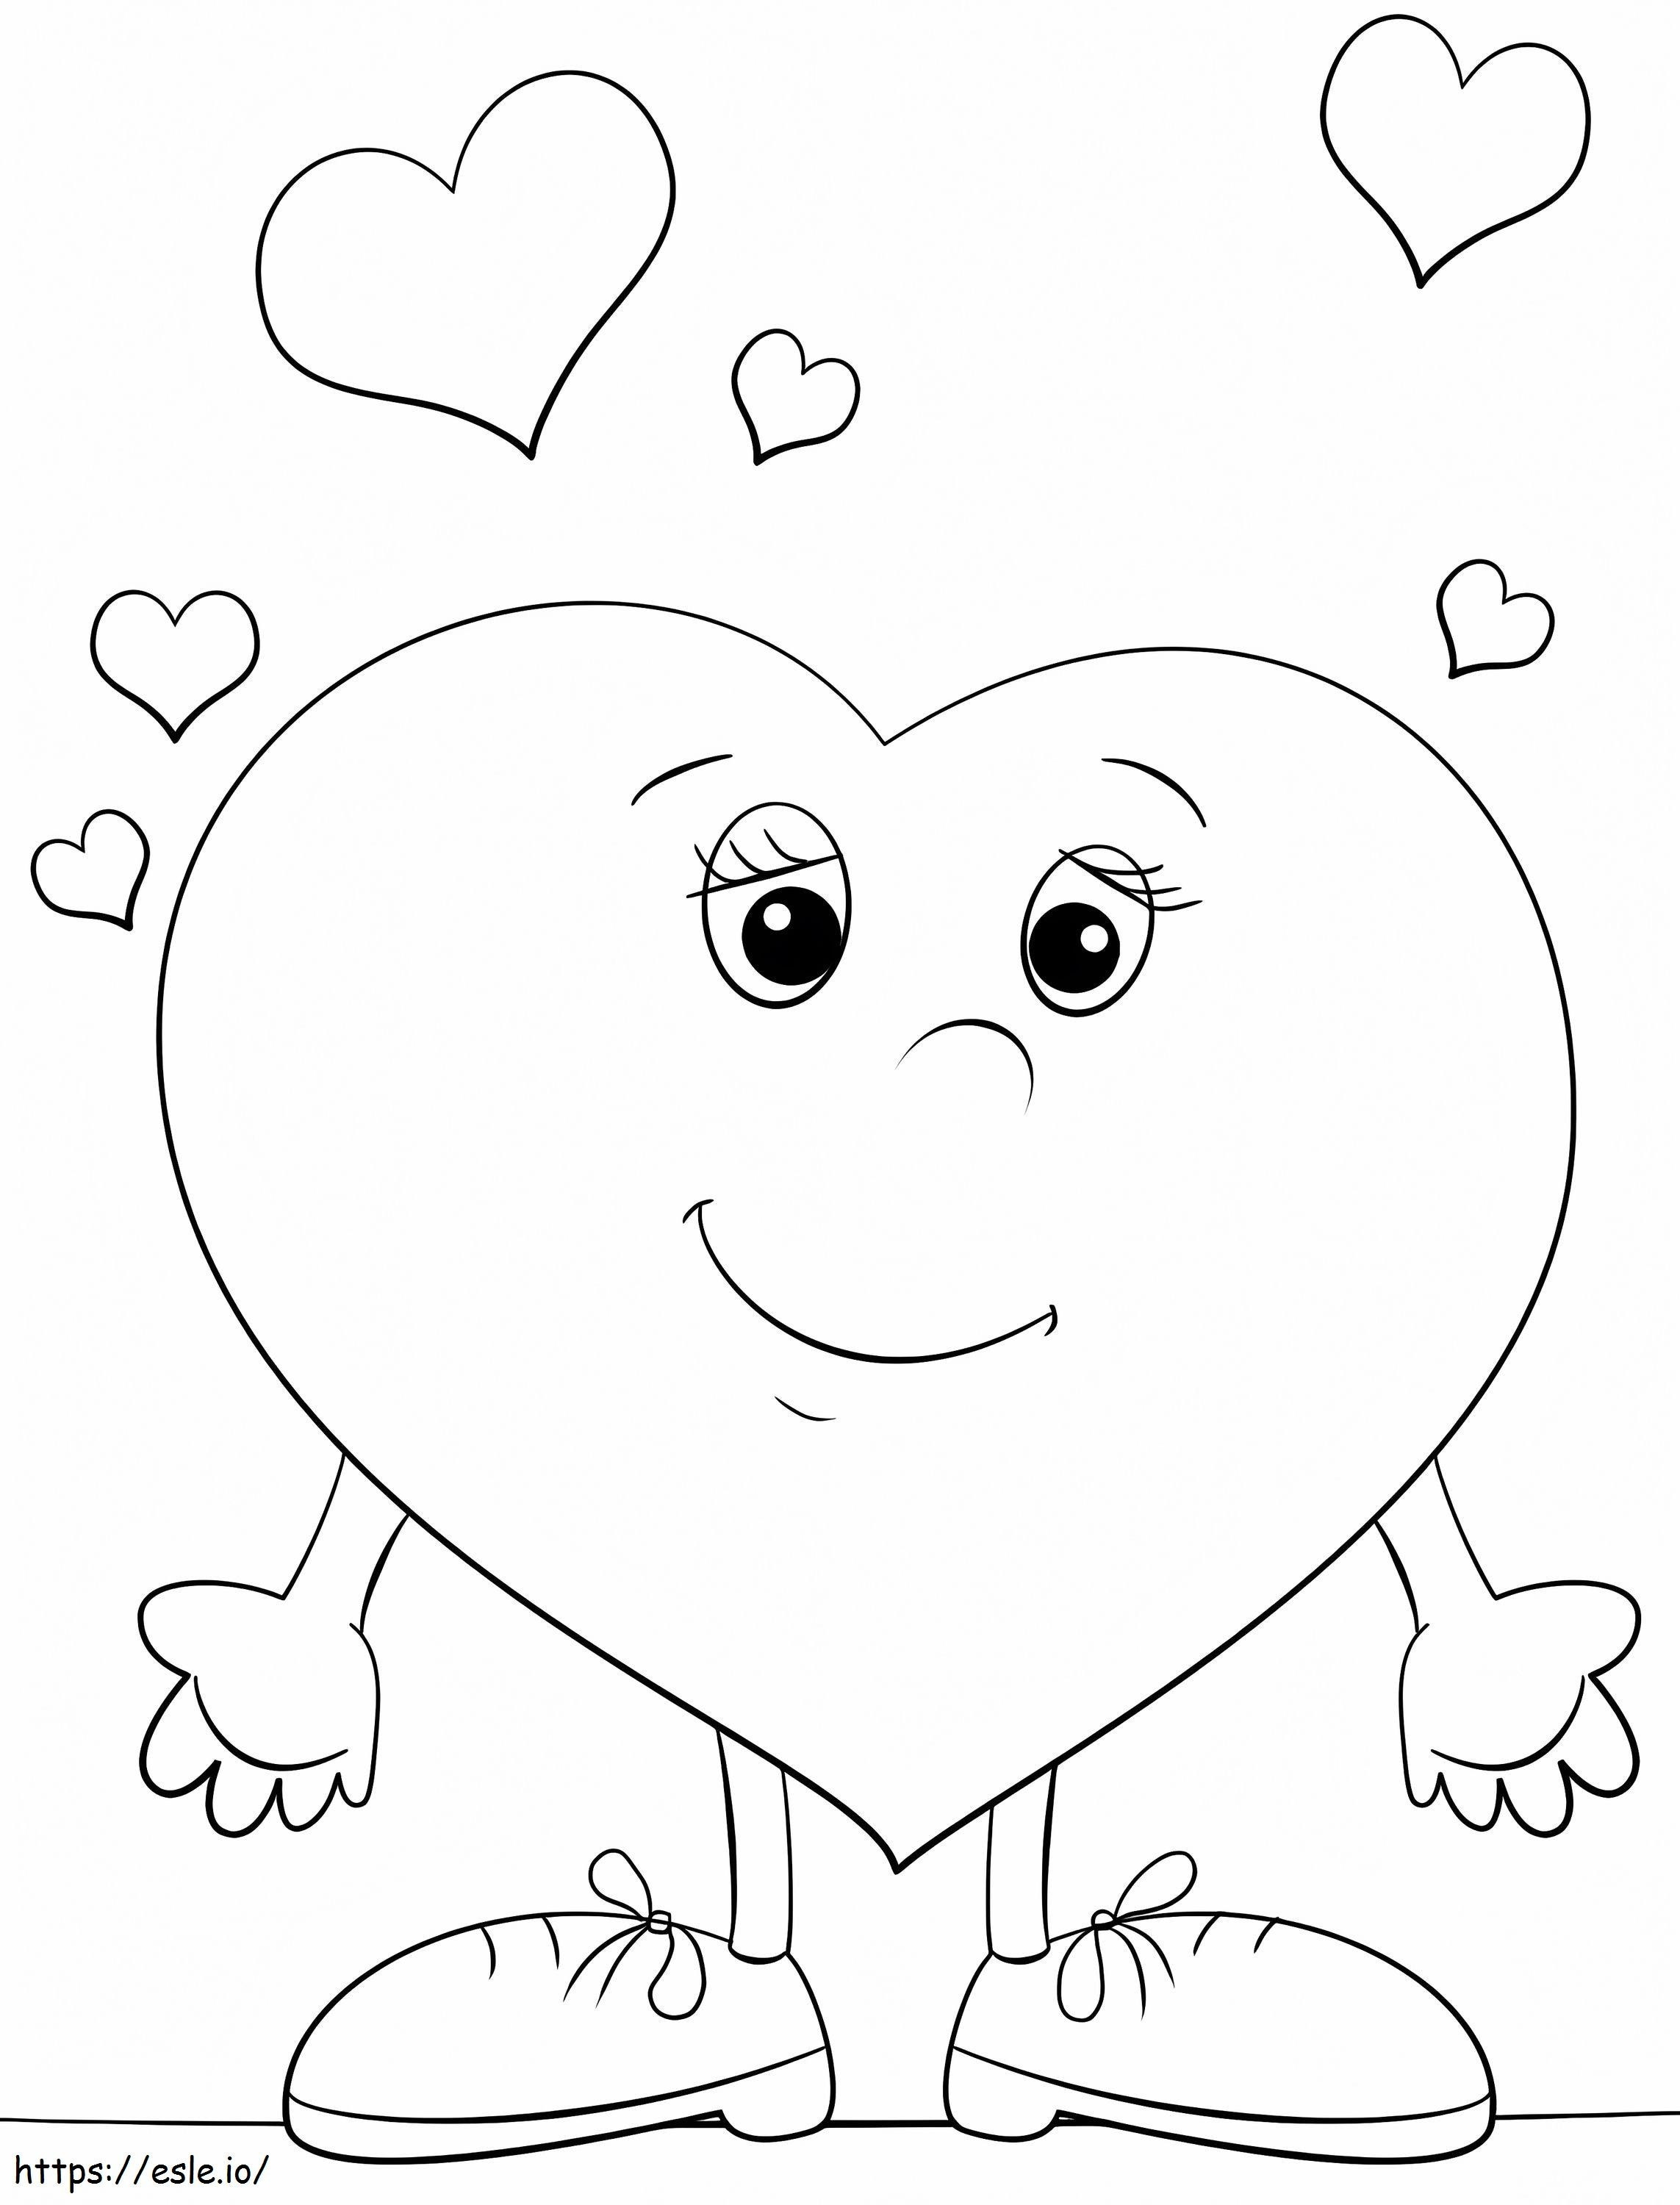 Cartoon Heart coloring page